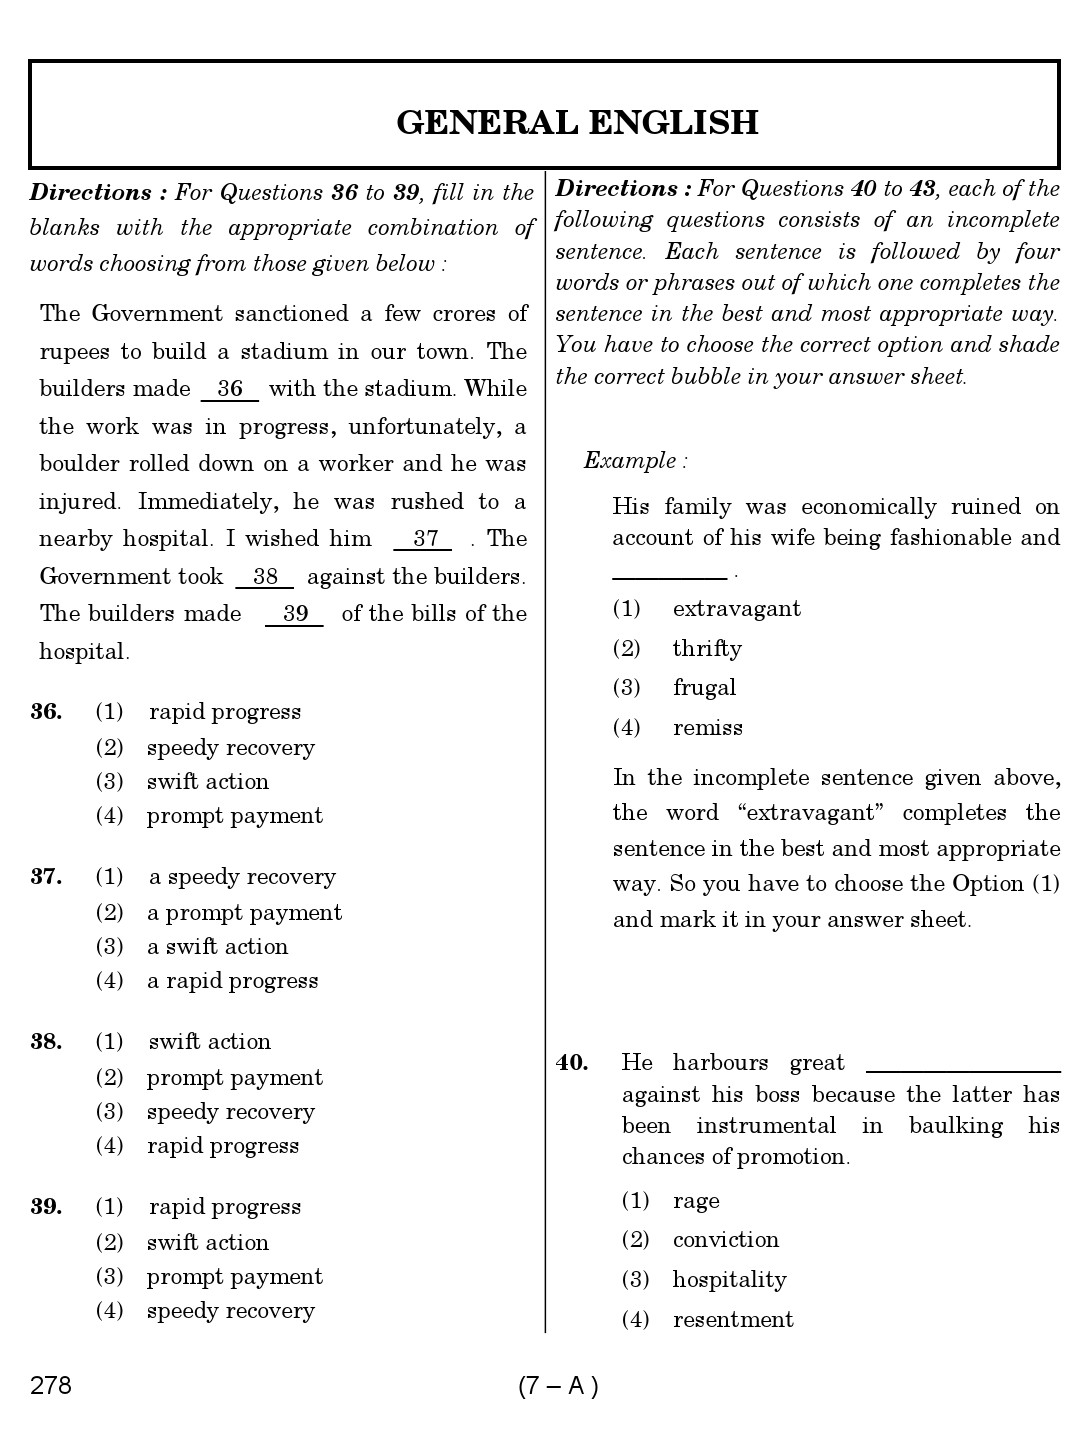 Karnataka PSC First Division Computer Assistants Exam Sample Question Paper 278 7